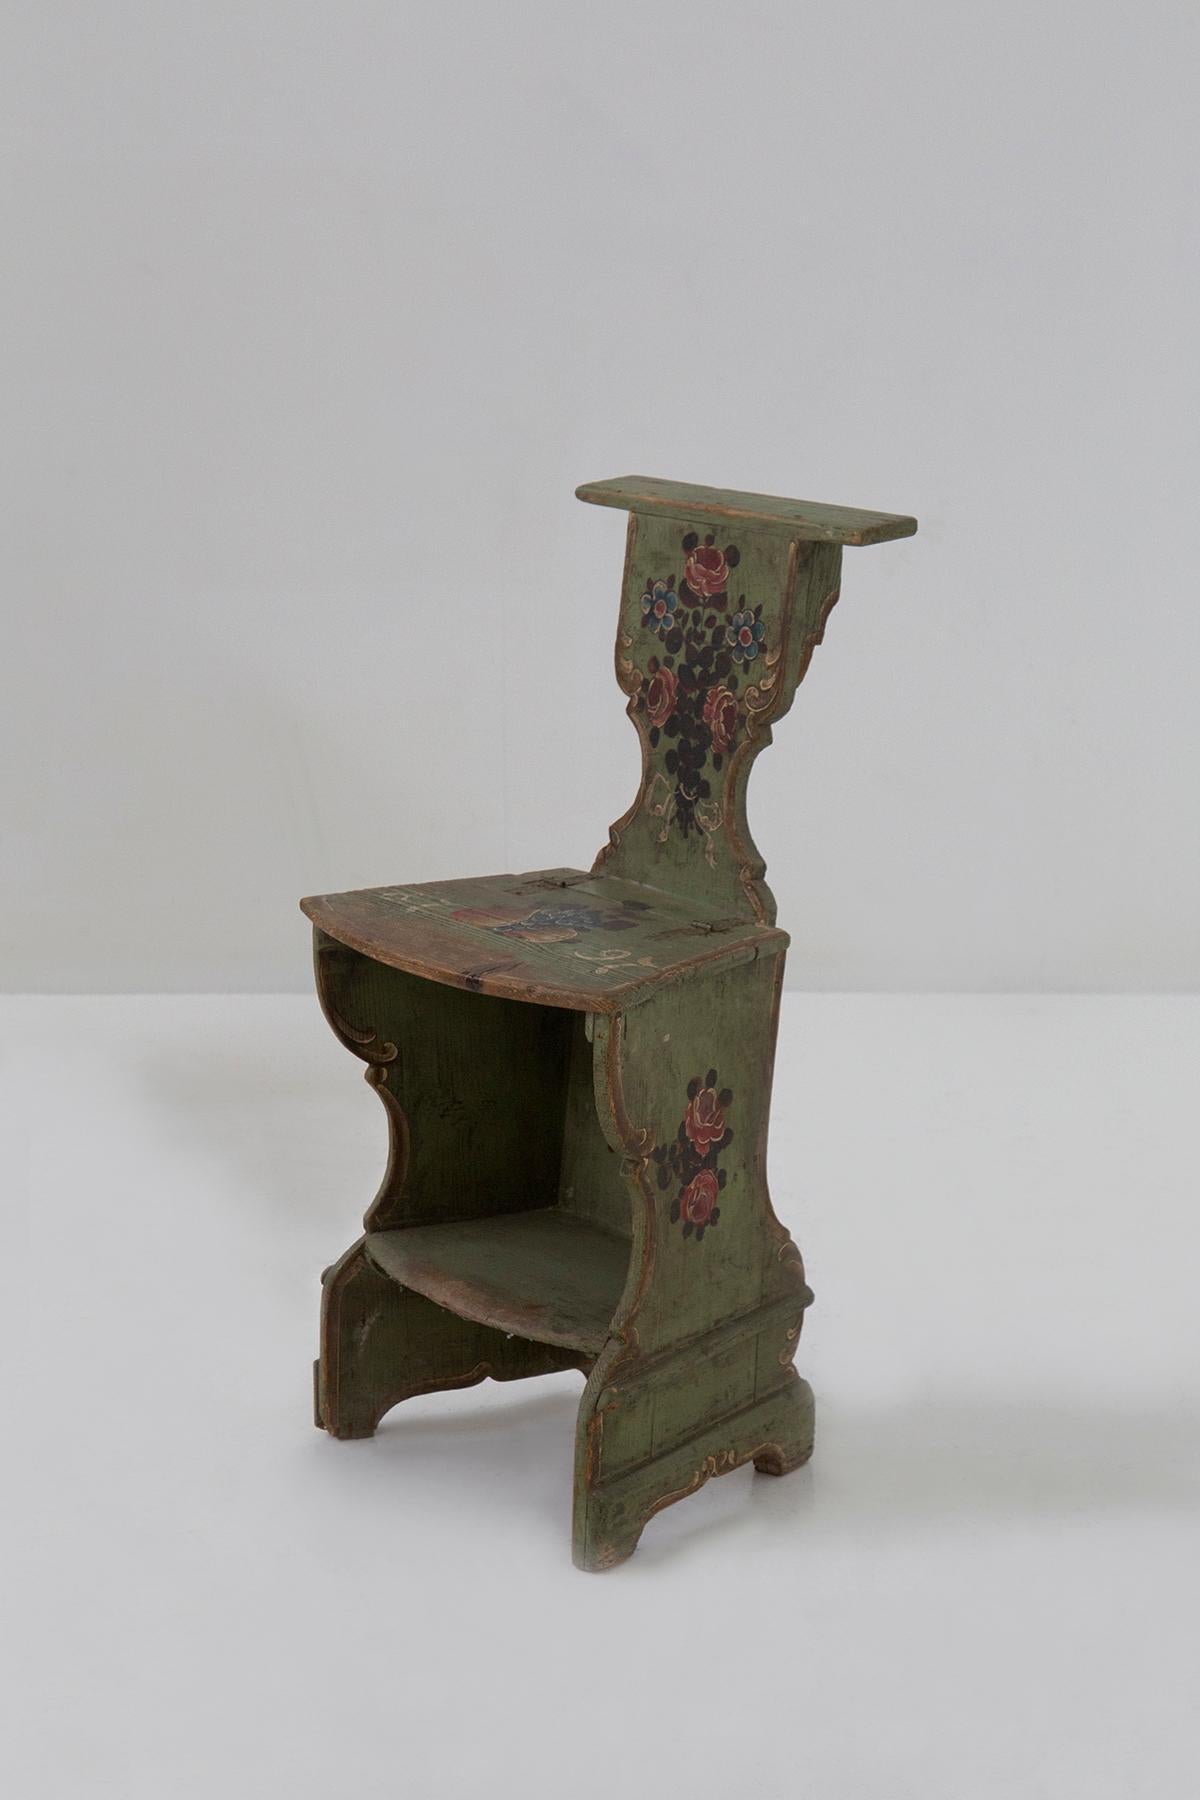 Baroque Revival Pair of kneeler chairs in polychrome wood, probably Tirol For Sale